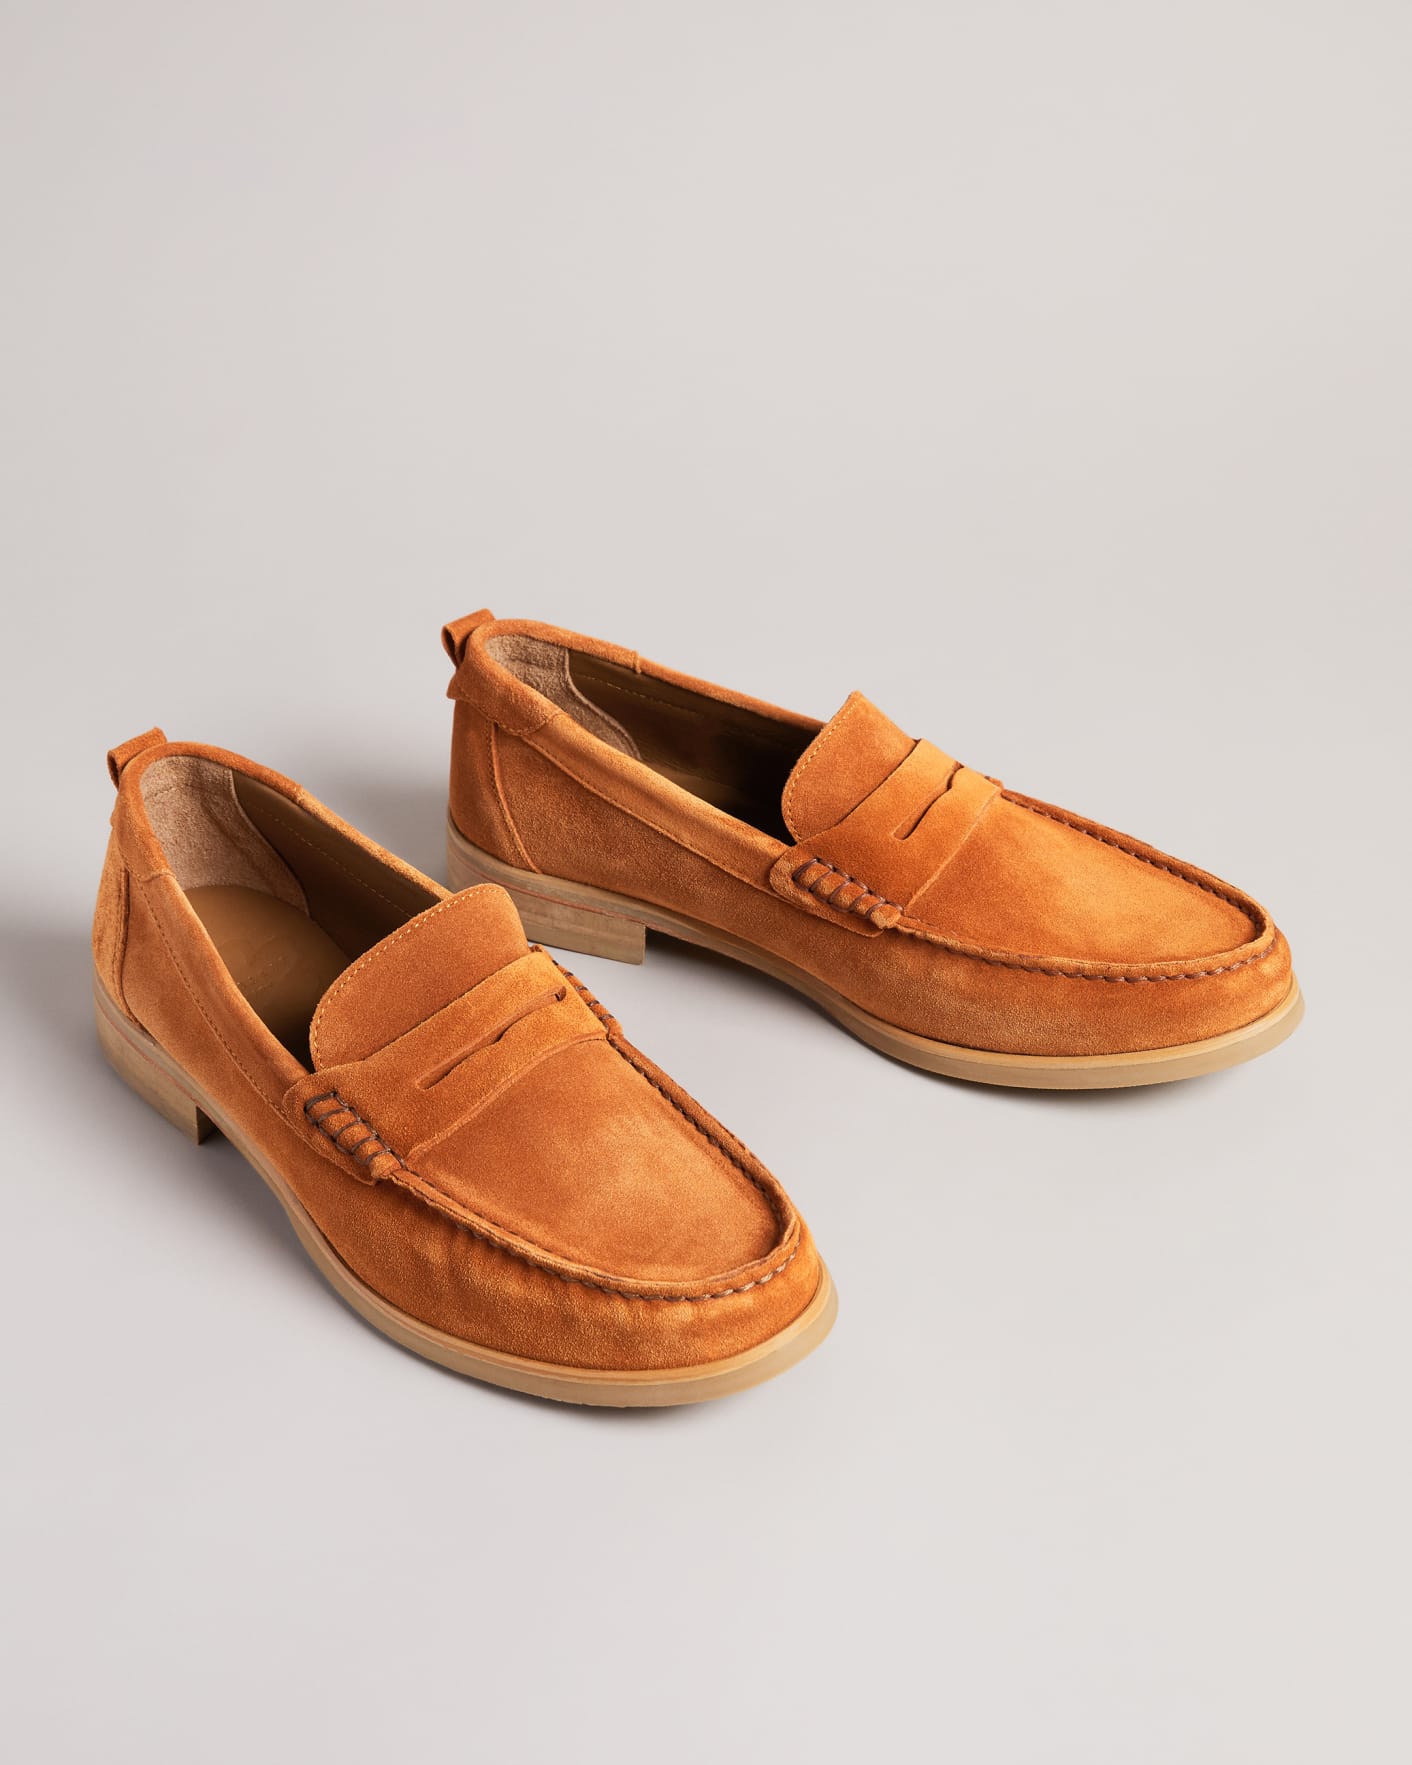 Tan Suede Moccasin Shoes Ted Baker